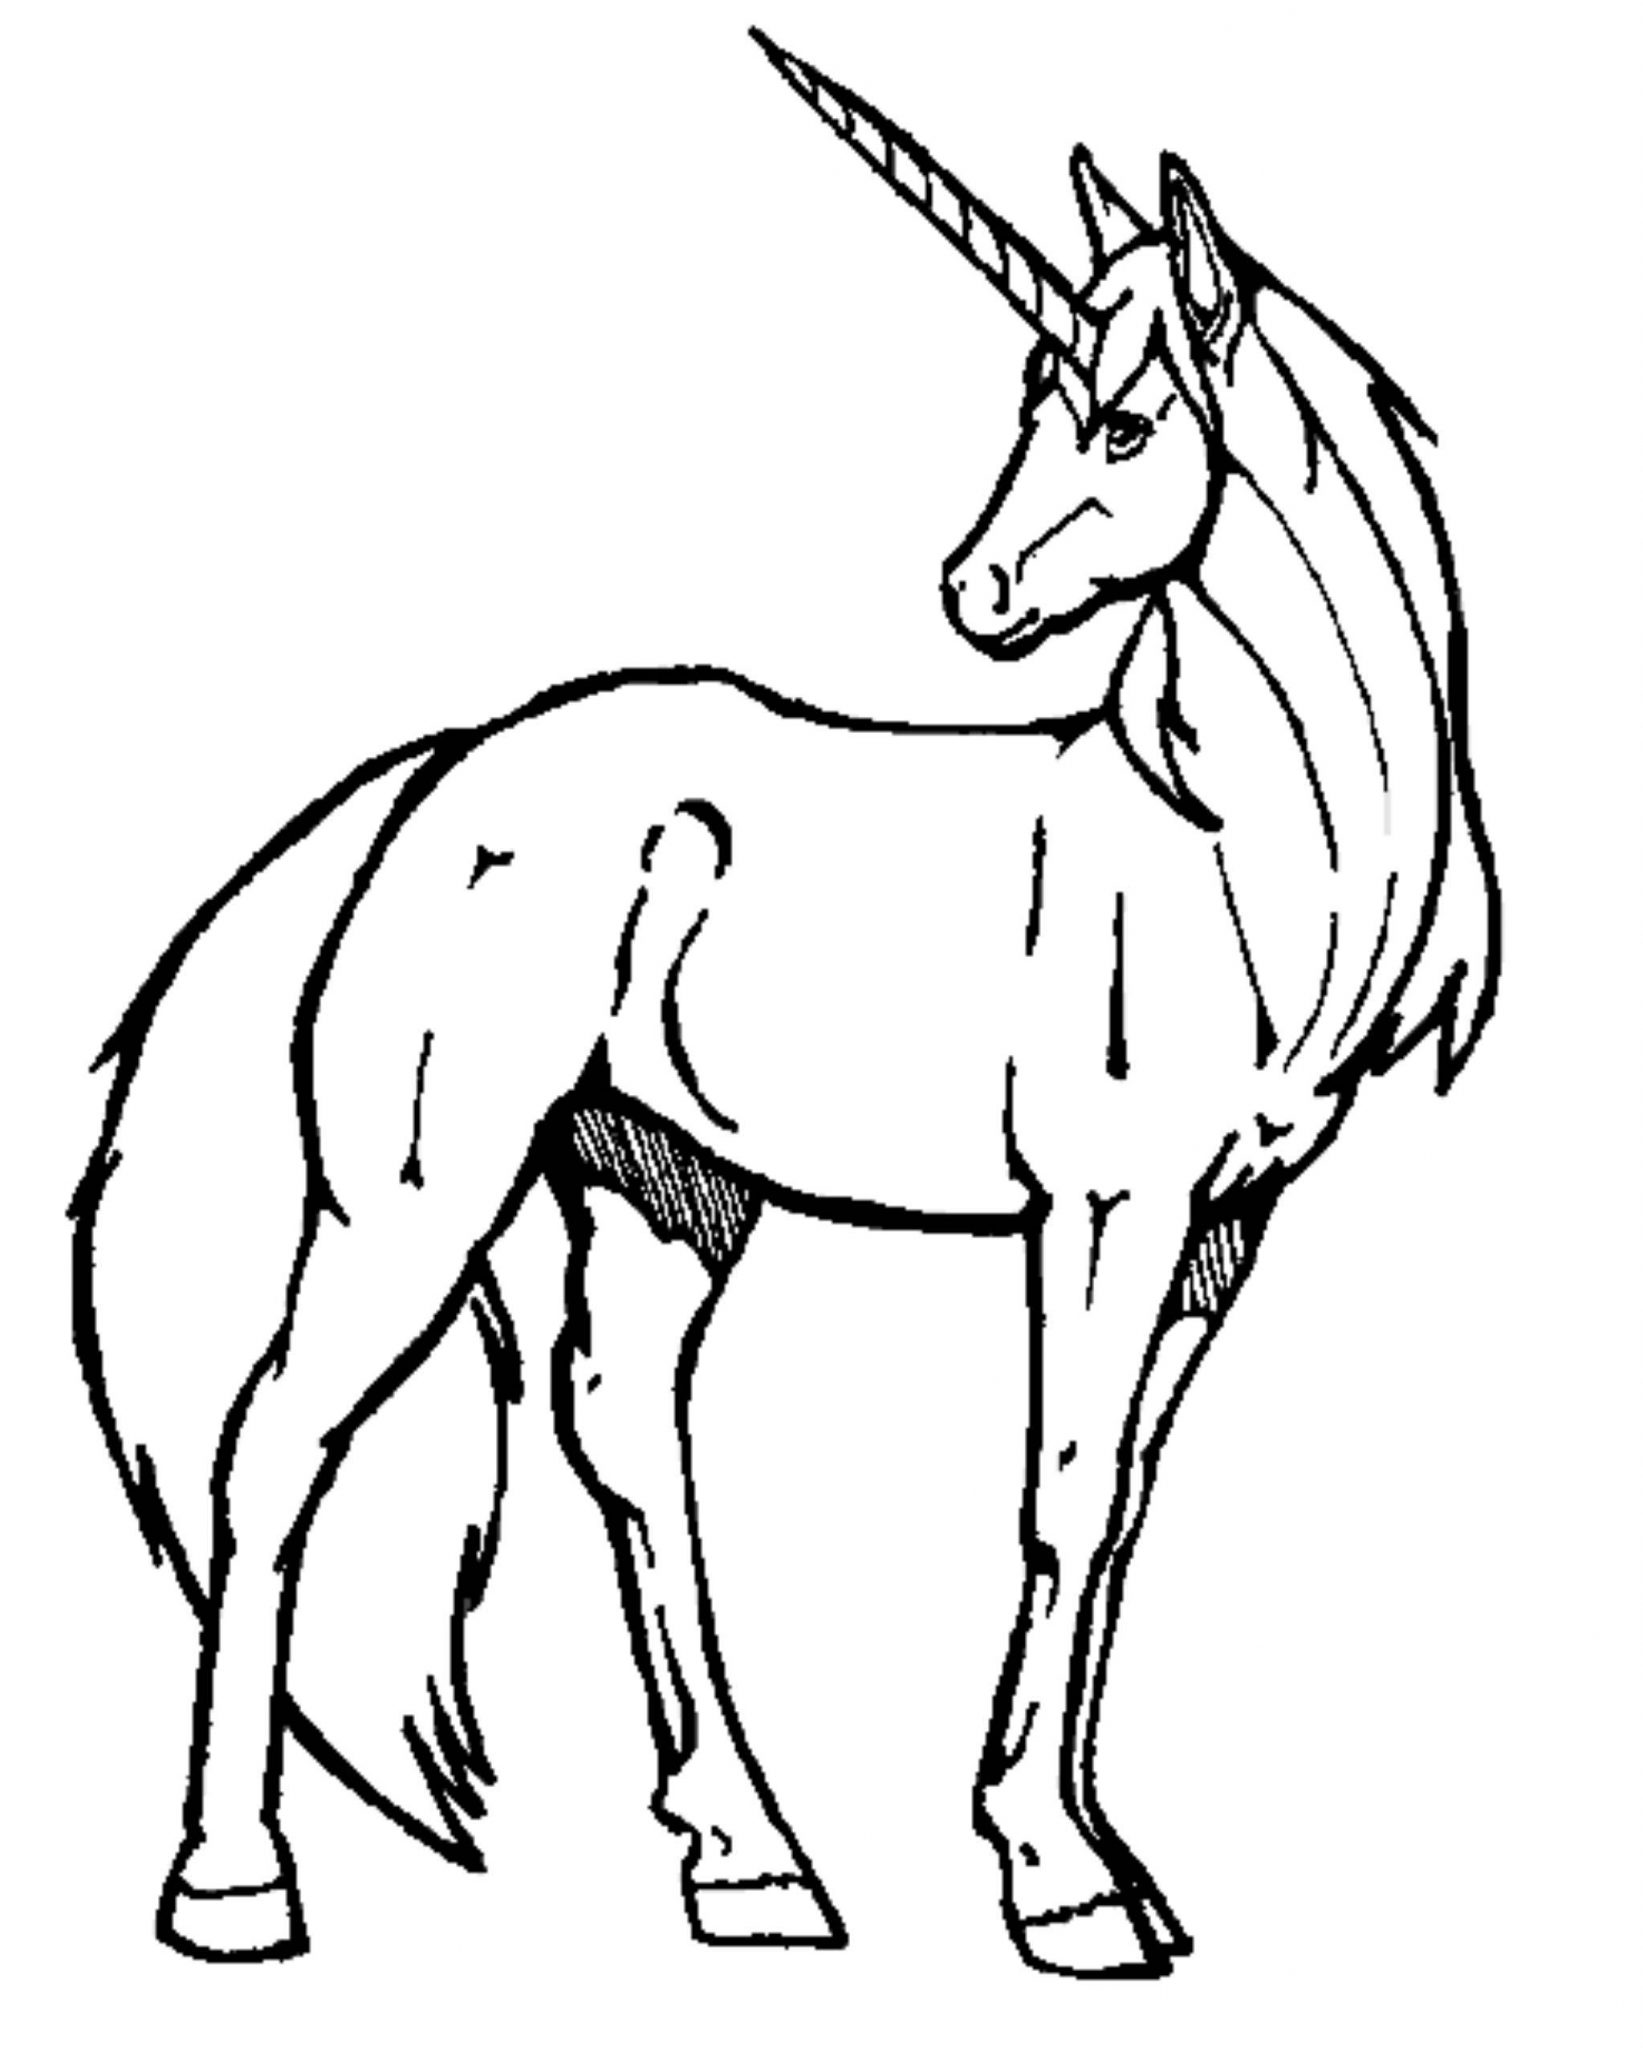 easy-unicorn-coloring-pages | | BestAppsForKids.com